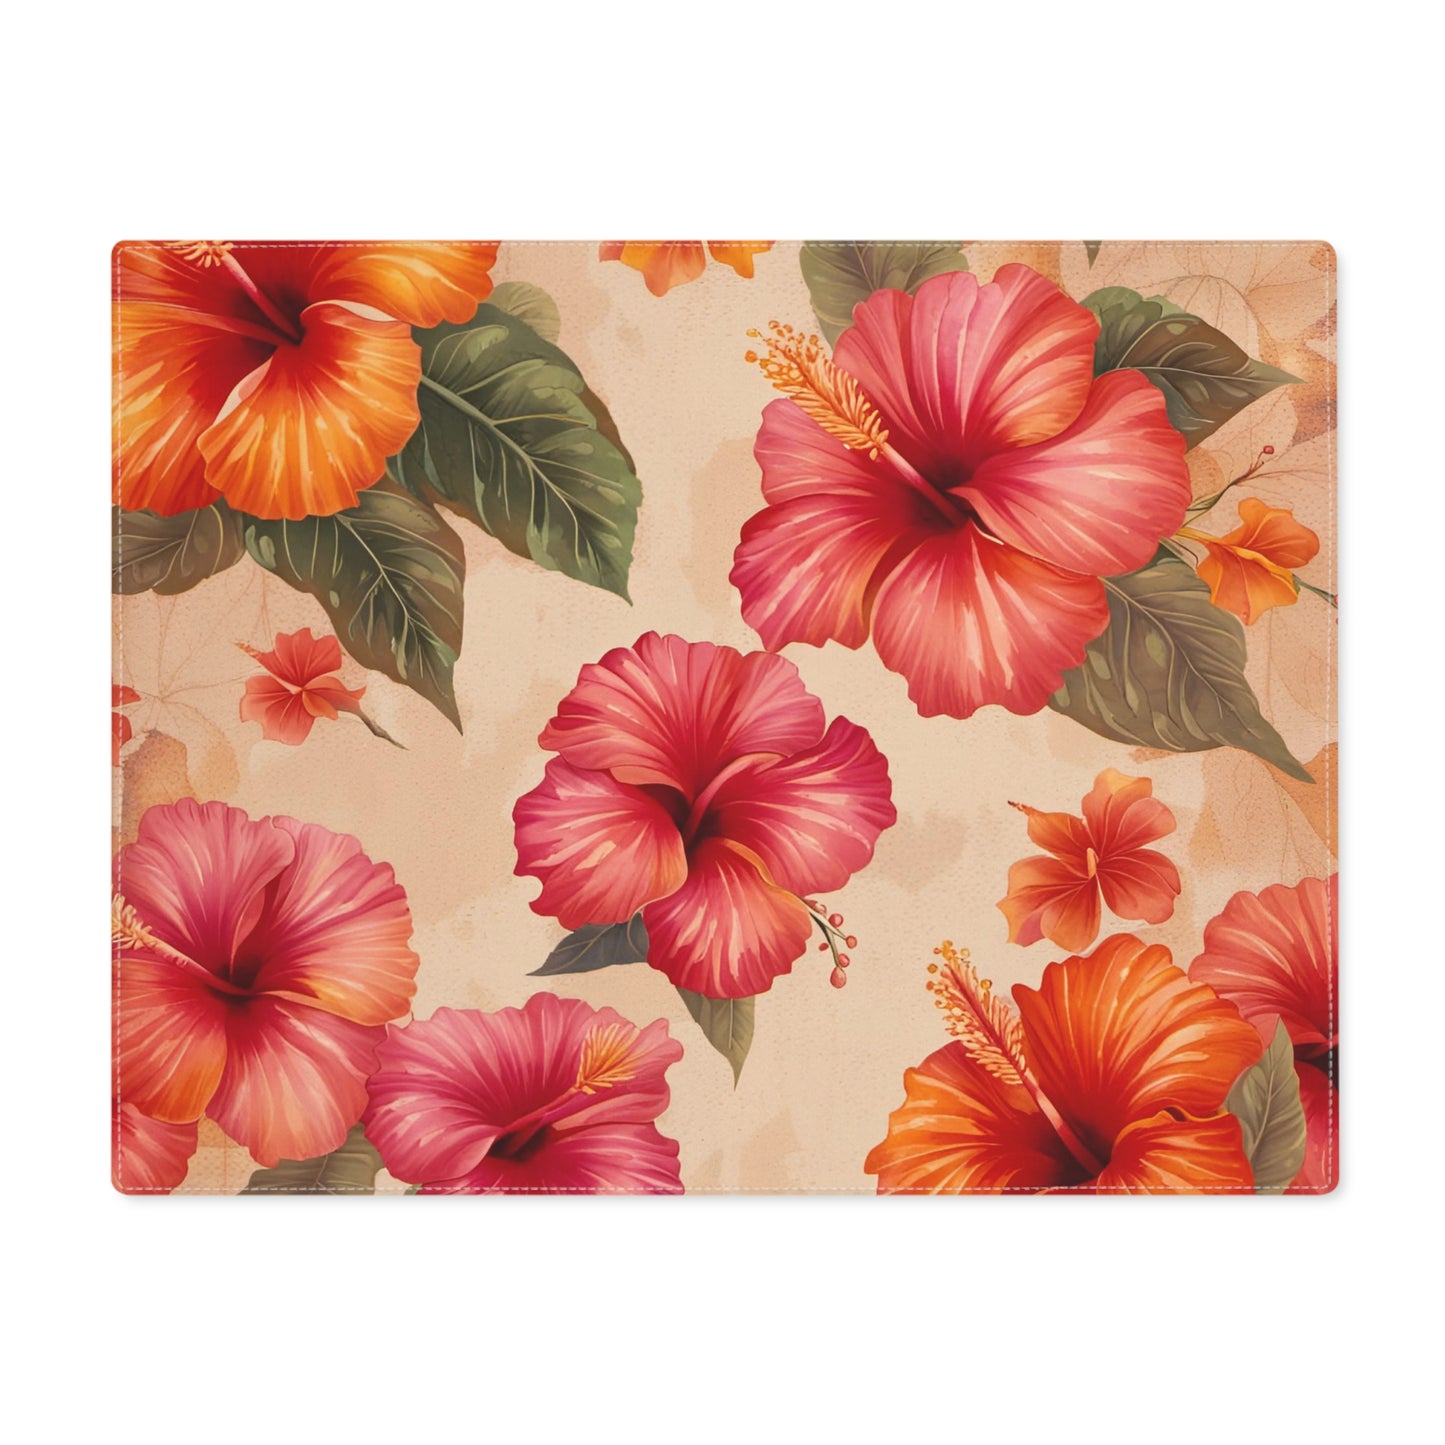 Home and Table Decor Gift Ideas Hibiscus Flowers Print Placemat